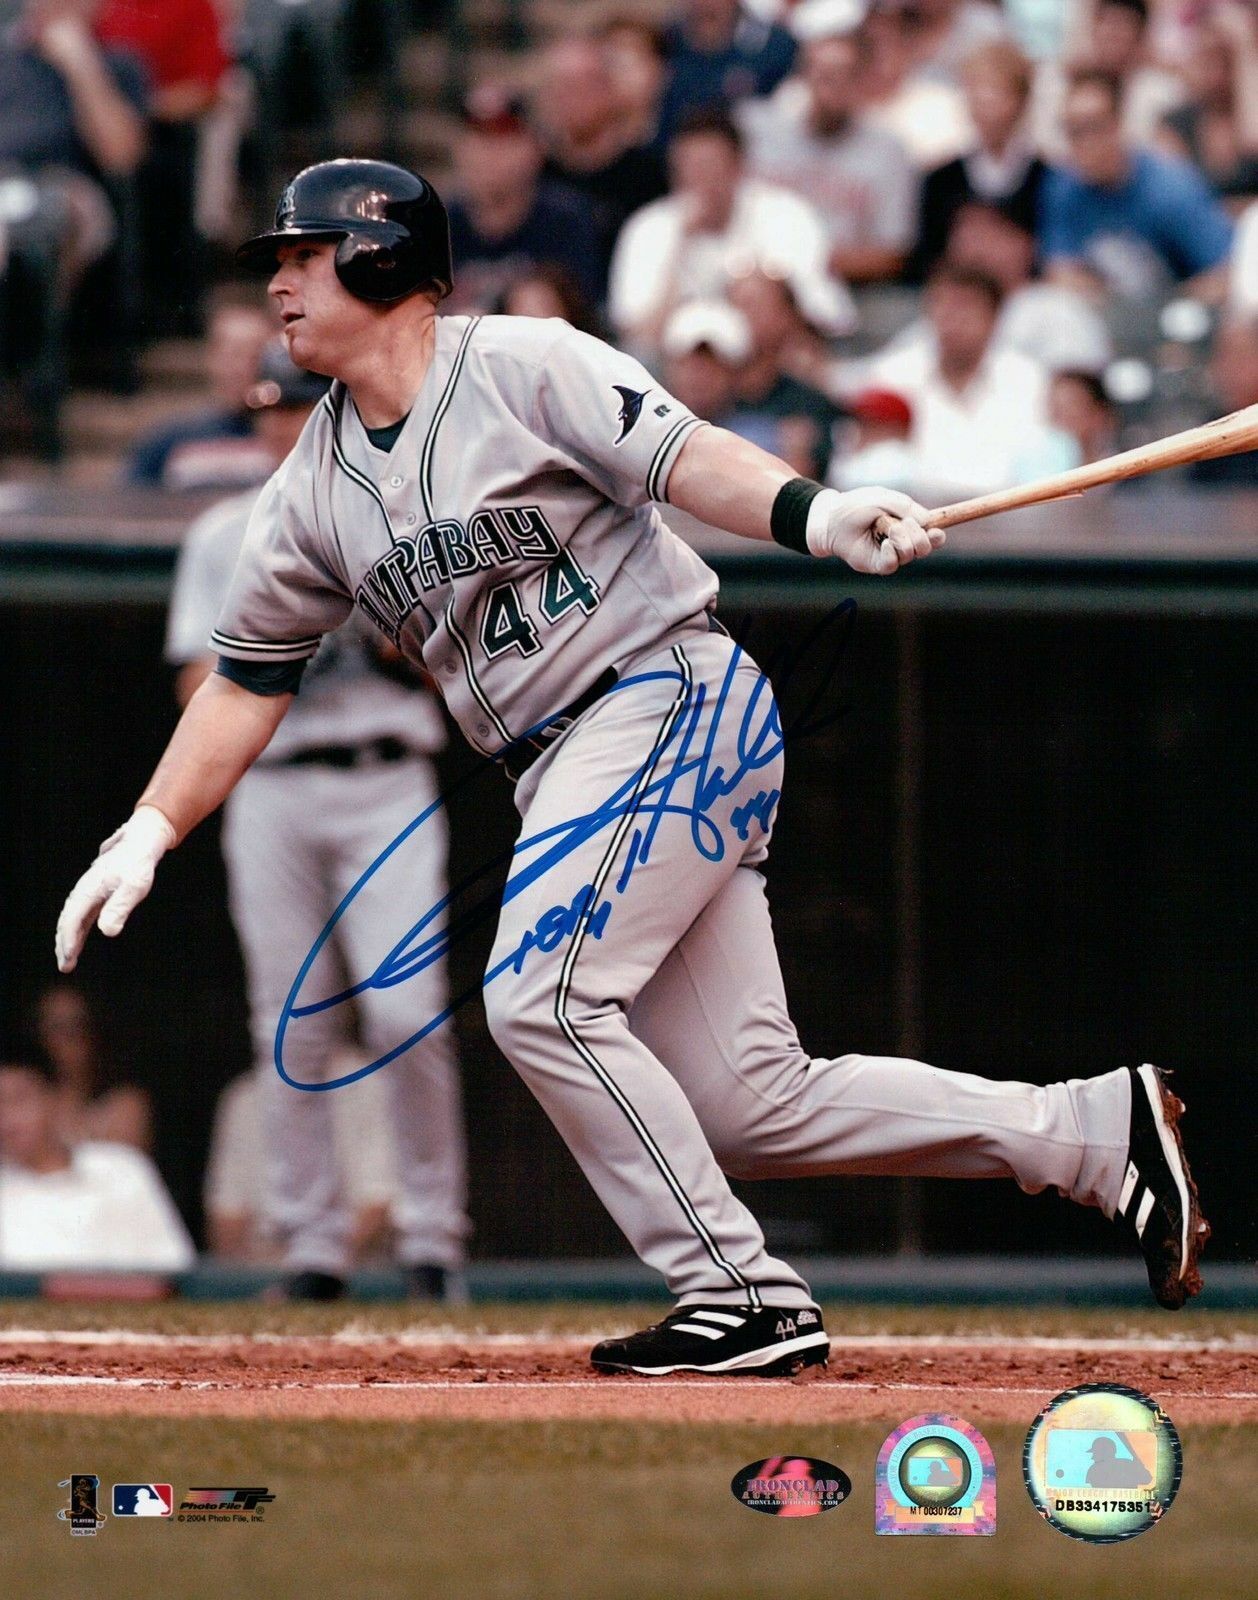 Toby Hall Signed 8X10 Photo Poster painting Autograph Tampa Bay Devil Rays MLB COA Swinging